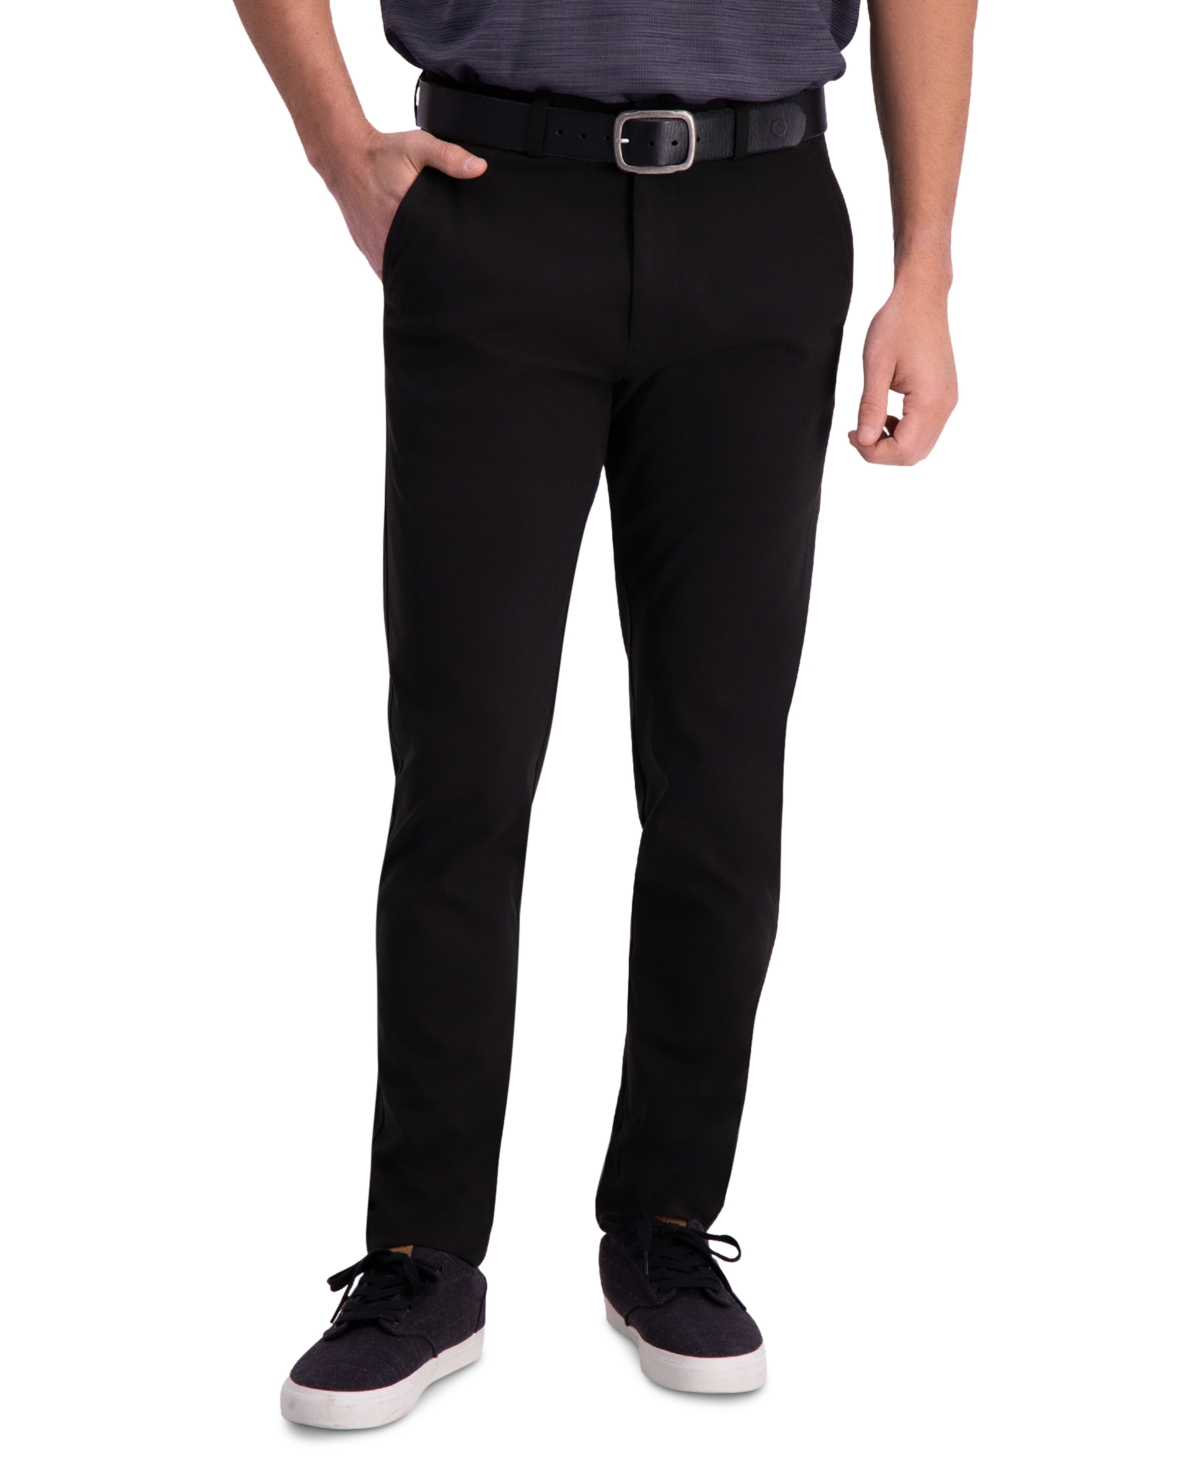 Men's Active Series Slim-Fit Stretch Solid Casual Pants - Charcoal